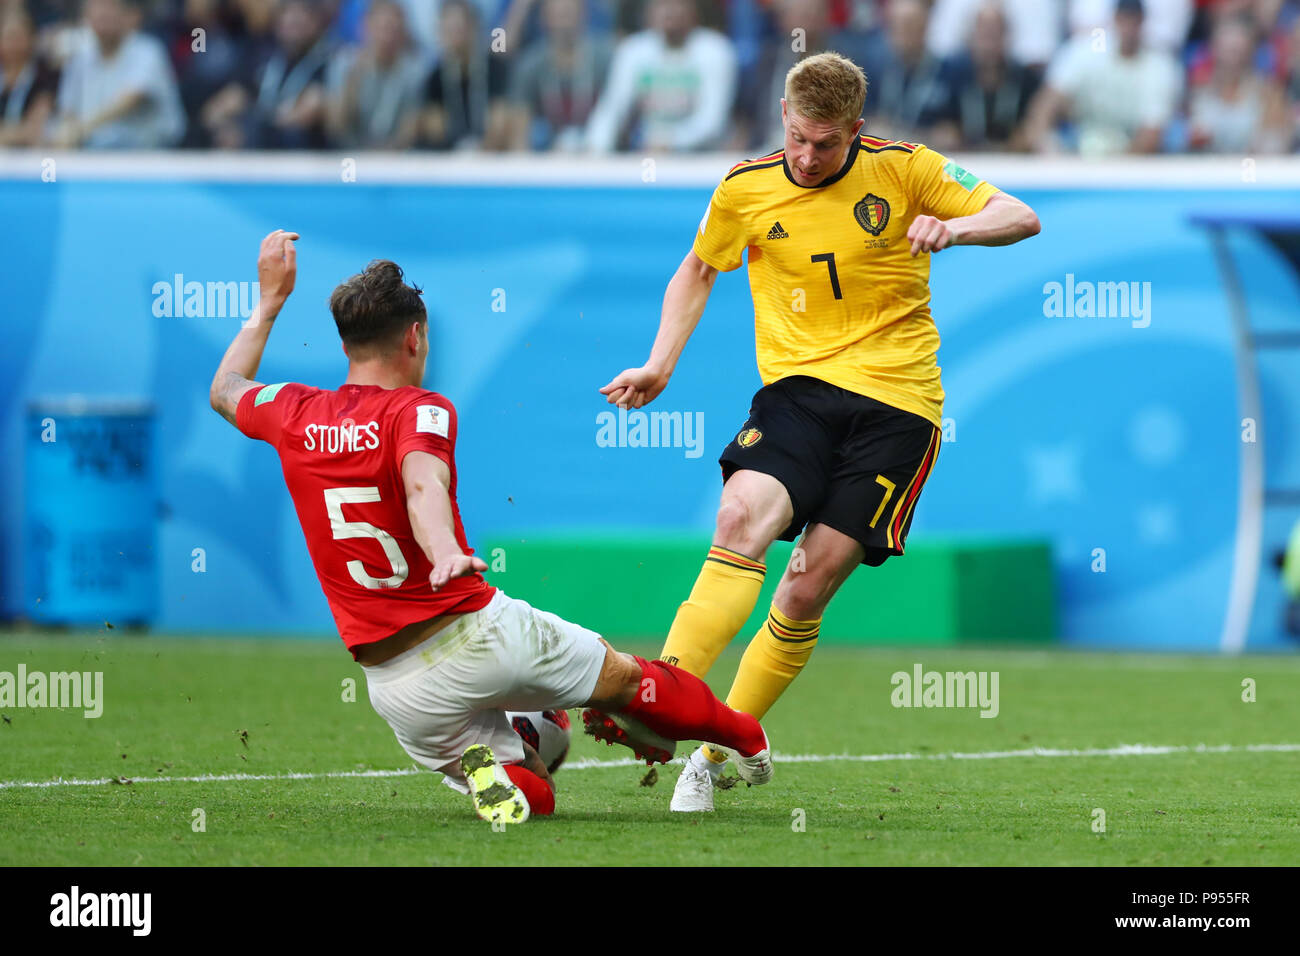 St. Petersburg, Russia. 14th July, 2018. (L-R) John Stones (ENG), Kevin De Bruyne (BEL) Football/Soccer : FIFA World Cup Russia 2018, 3rd place match between Belgium 2-0 England at Saint Petersburg Stadium in St. Petersburg, Russia . Credit: Yohei Osada/AFLO SPORT/Alamy Live News Stock Photo